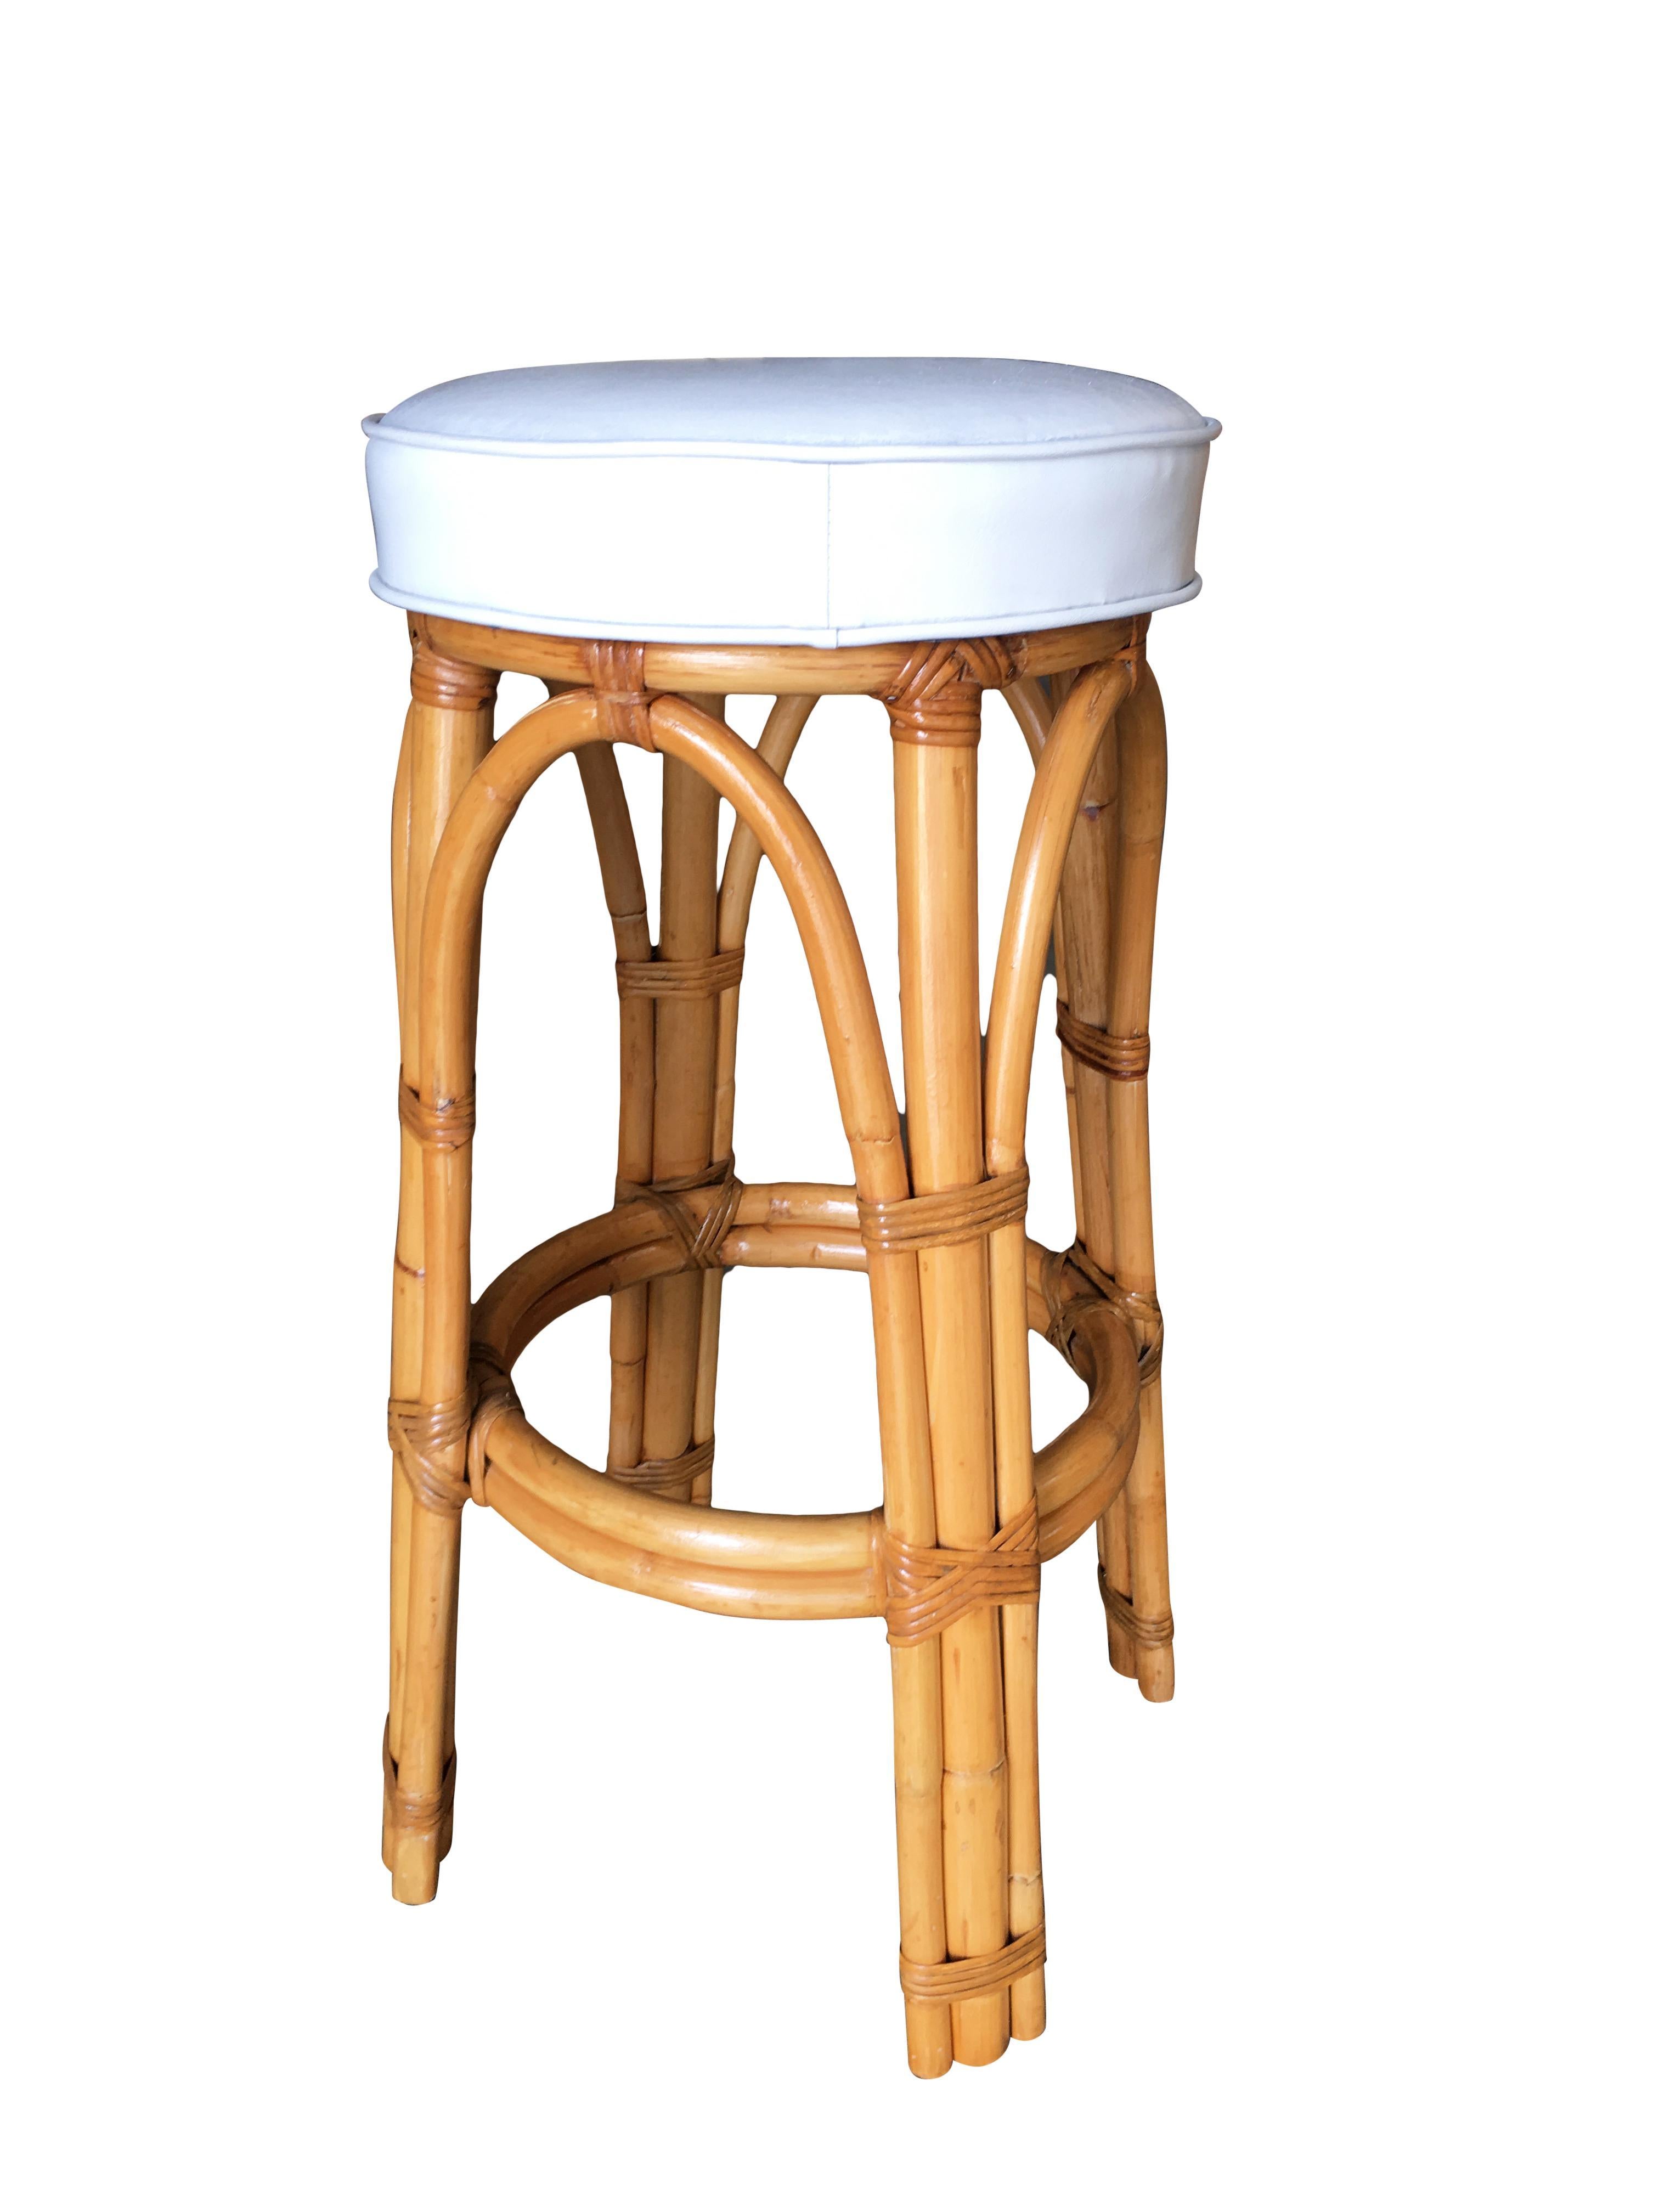 Set of three 1950s pole leg Rattan bar stool with white vinyl upholstery.

Custom cushions C.O.M. (Costumers Own Material) are included in the price. Simply supply the fabric and we have the cushions made for you. If you need help sourcing fabric we